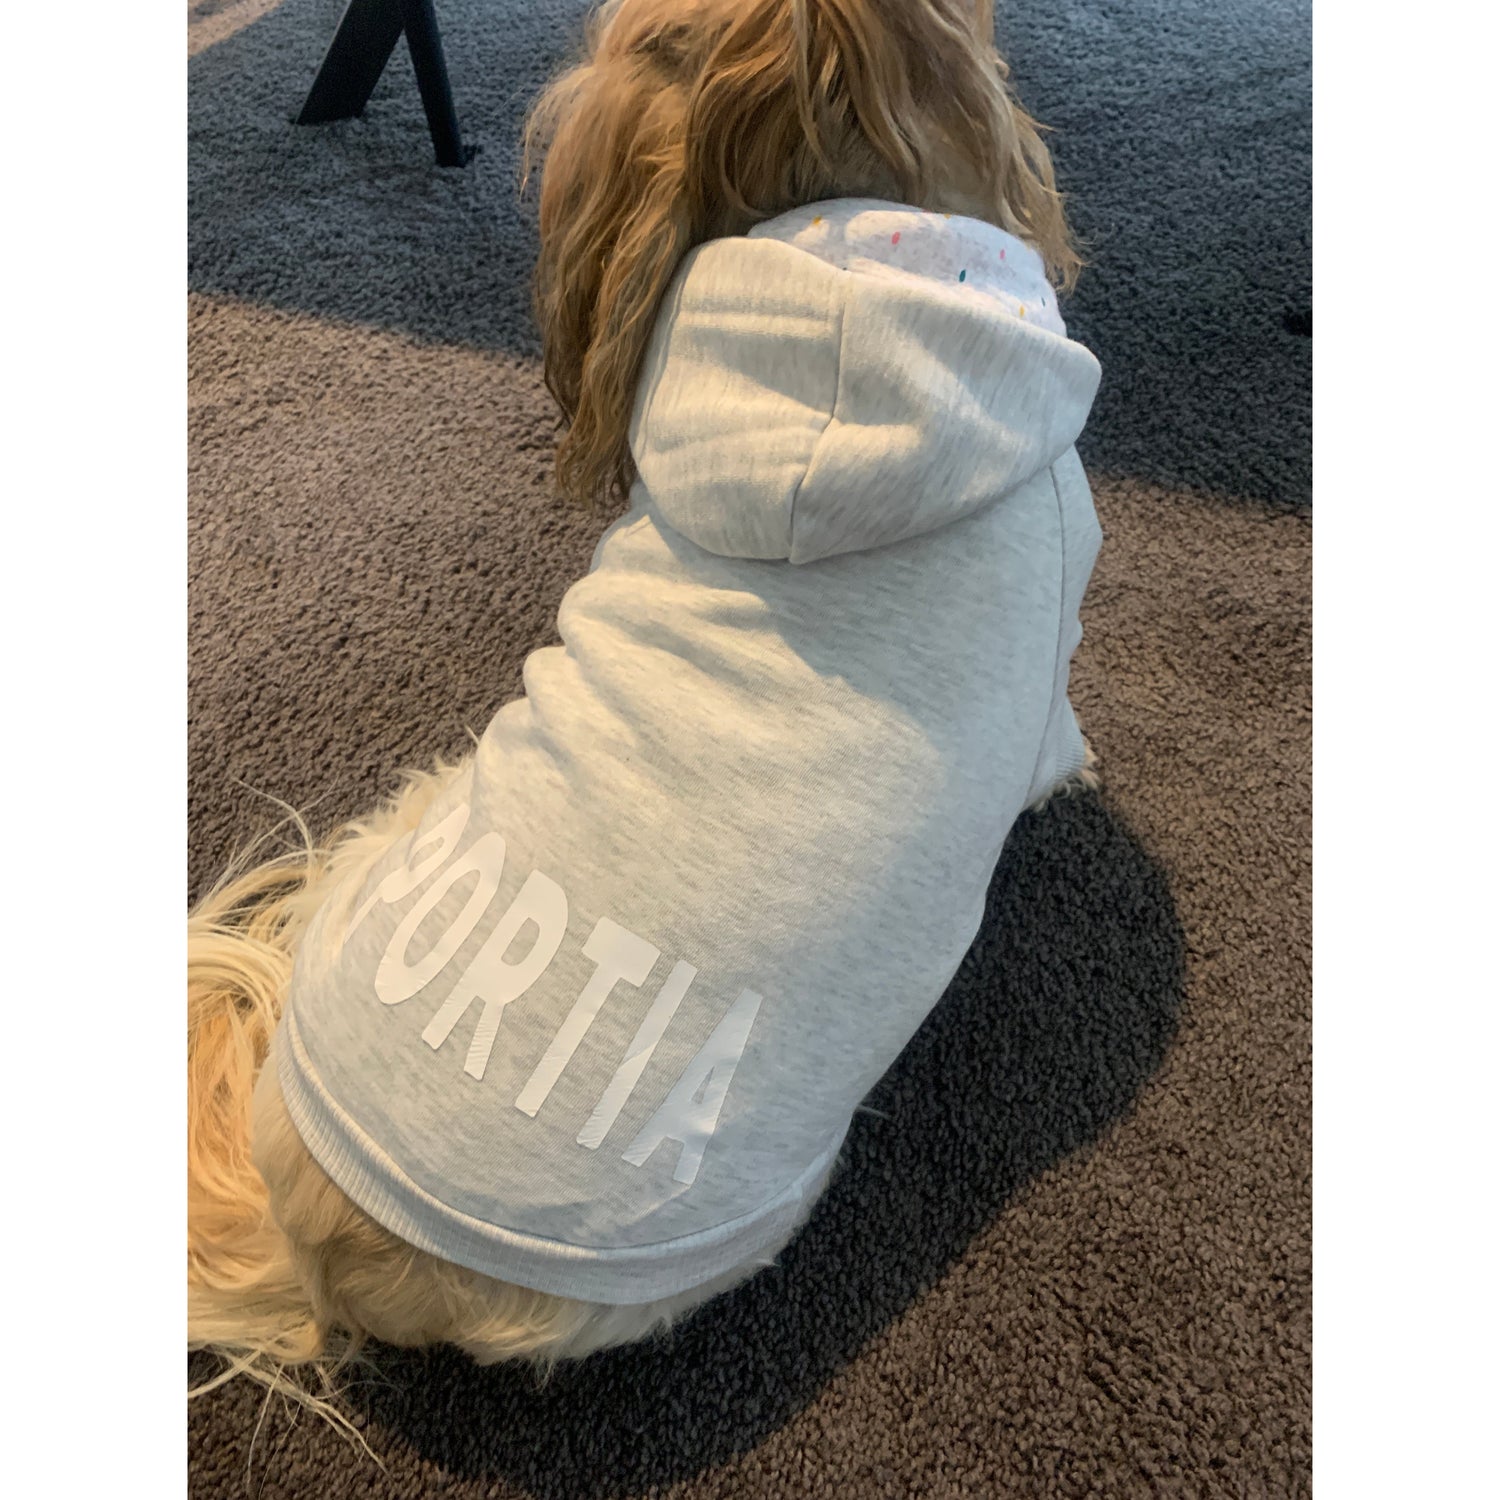 Dog model wearing a hoodie with her name on it